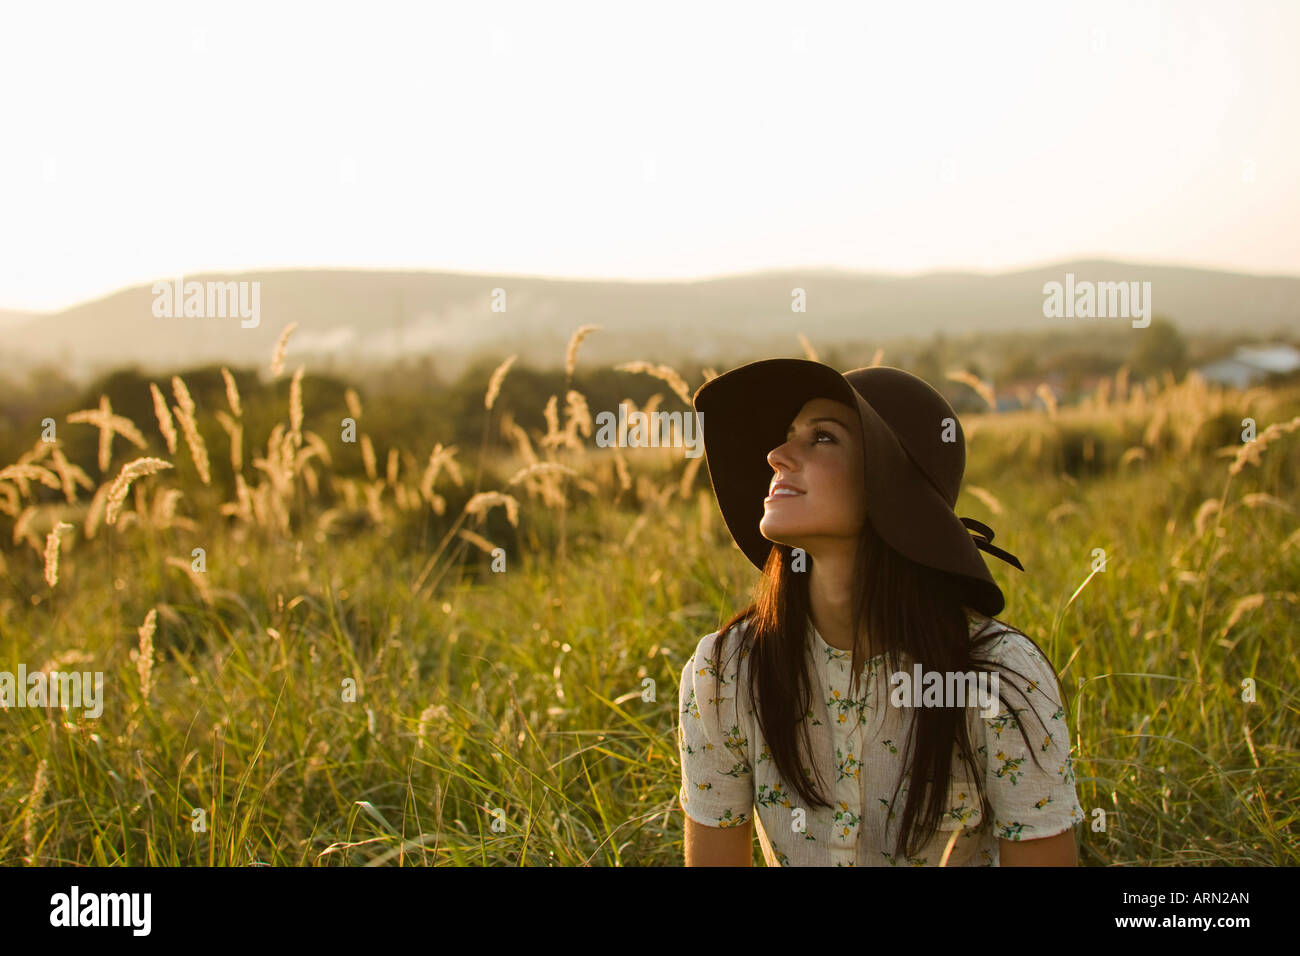 Woman wearing hat sitting in grass Stock Photo